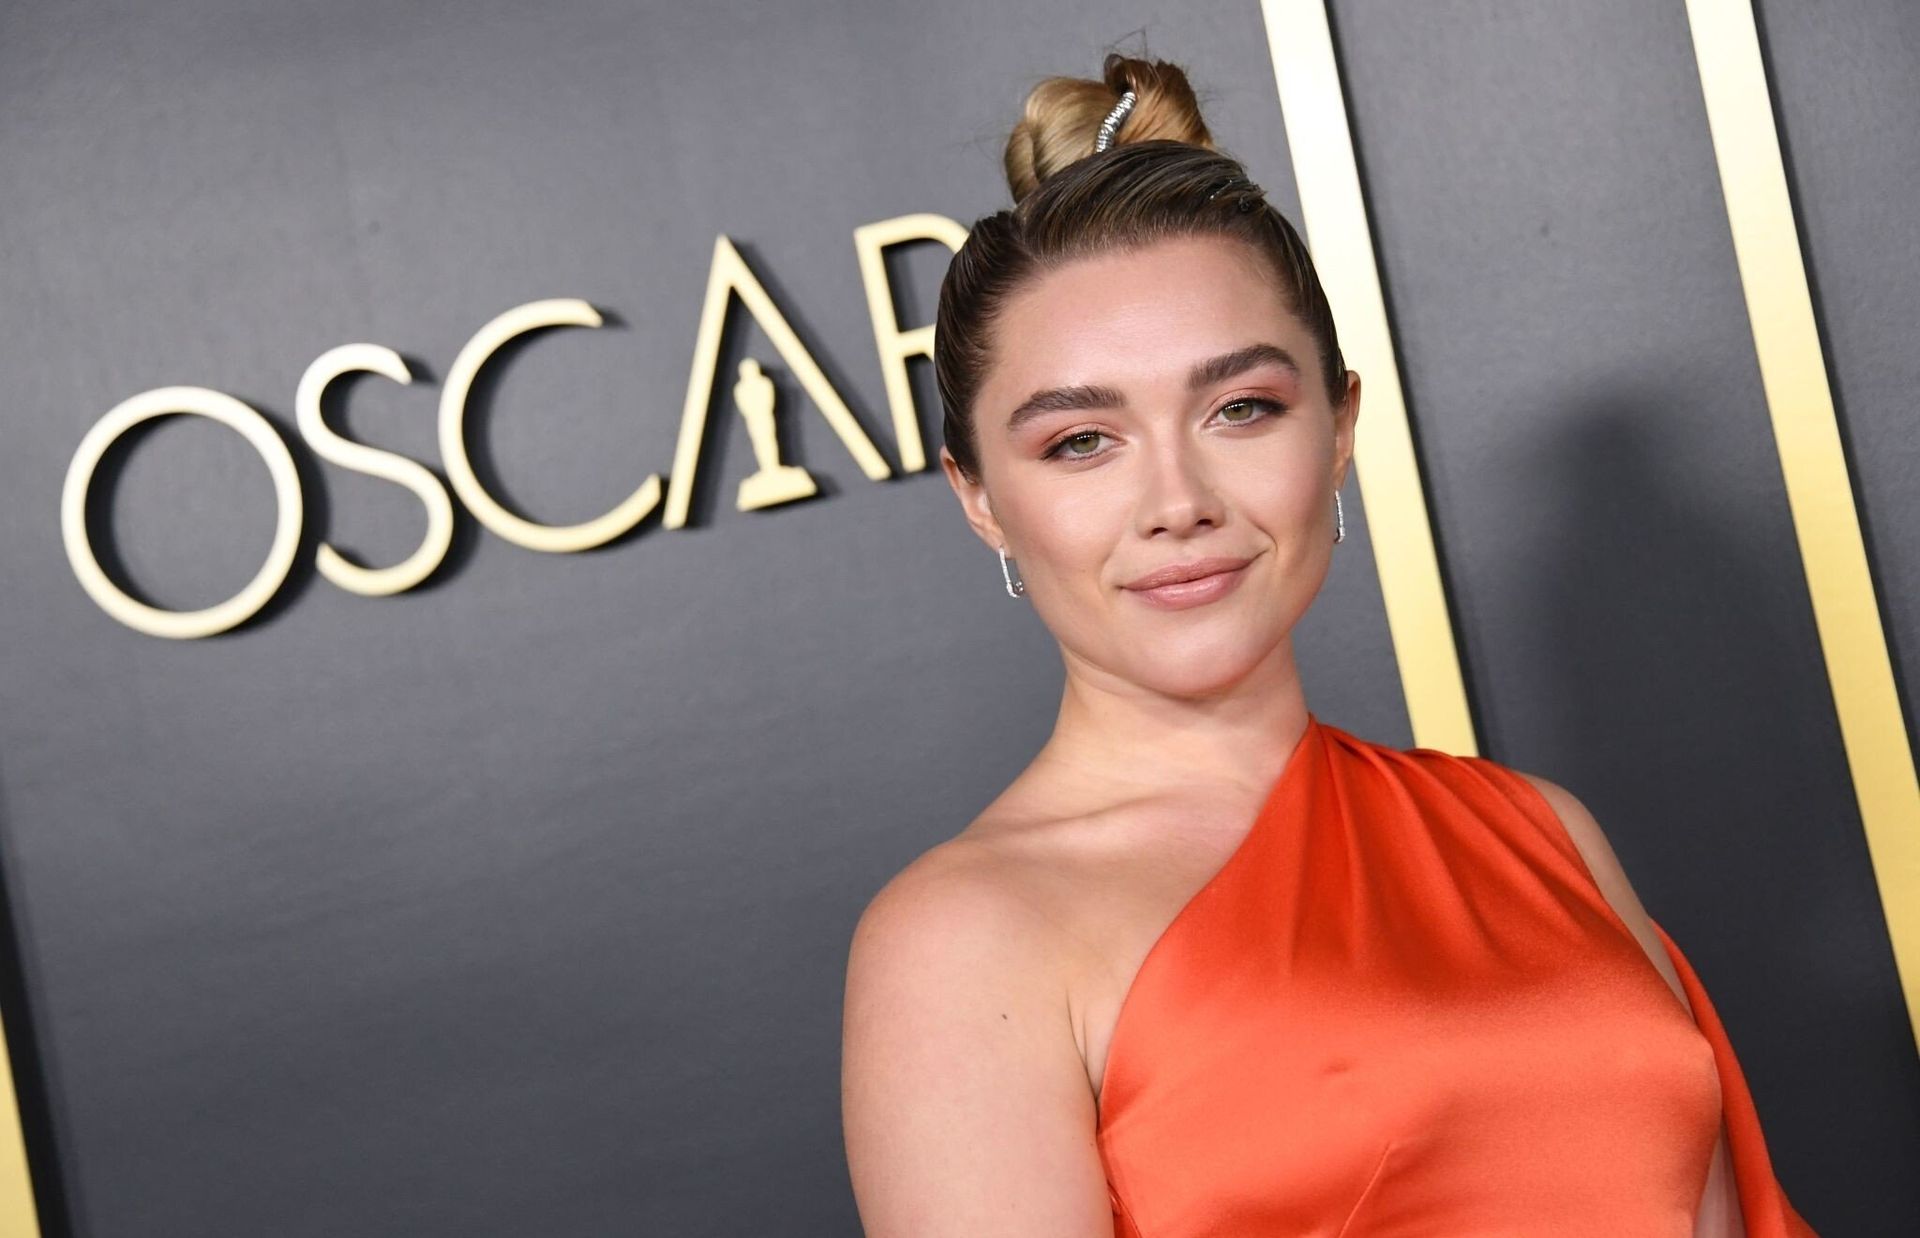 Florence Pugh Shows Her Pokies At The 92nd Academy Awards Nominees Luncheon 0007